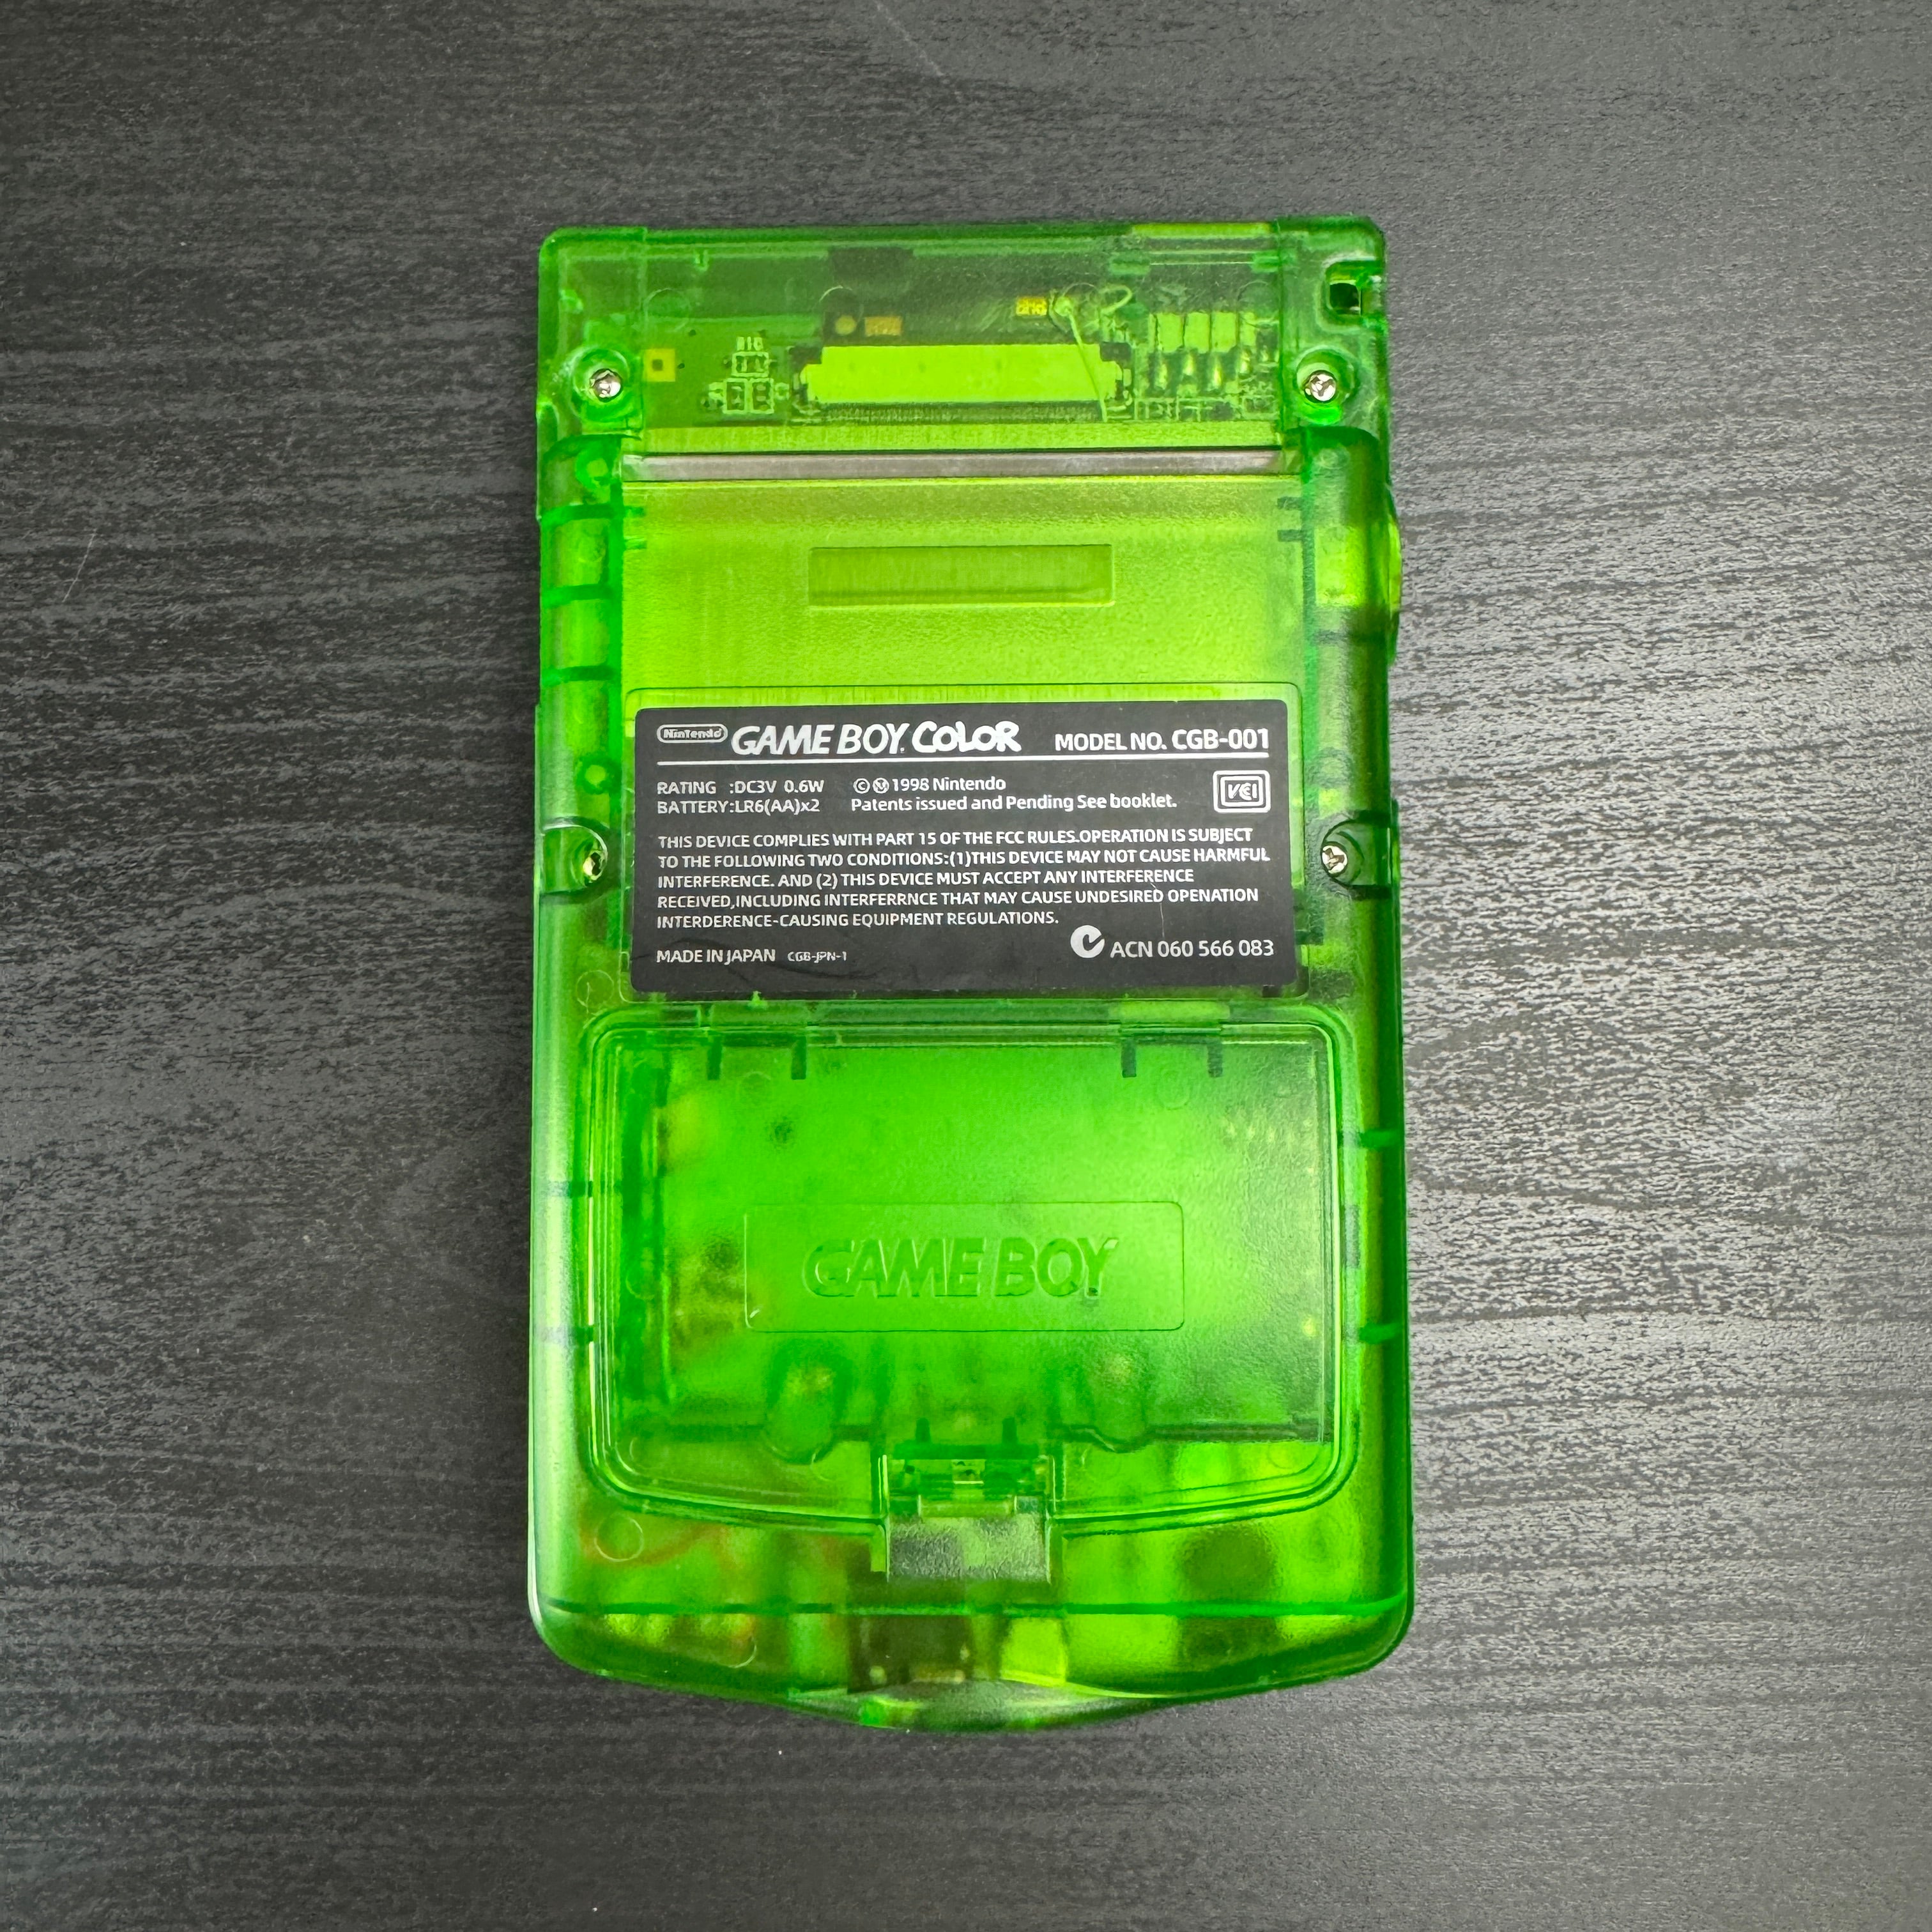 Modded Game Boy Color w/ IPS Display (Clear Green and Lime)